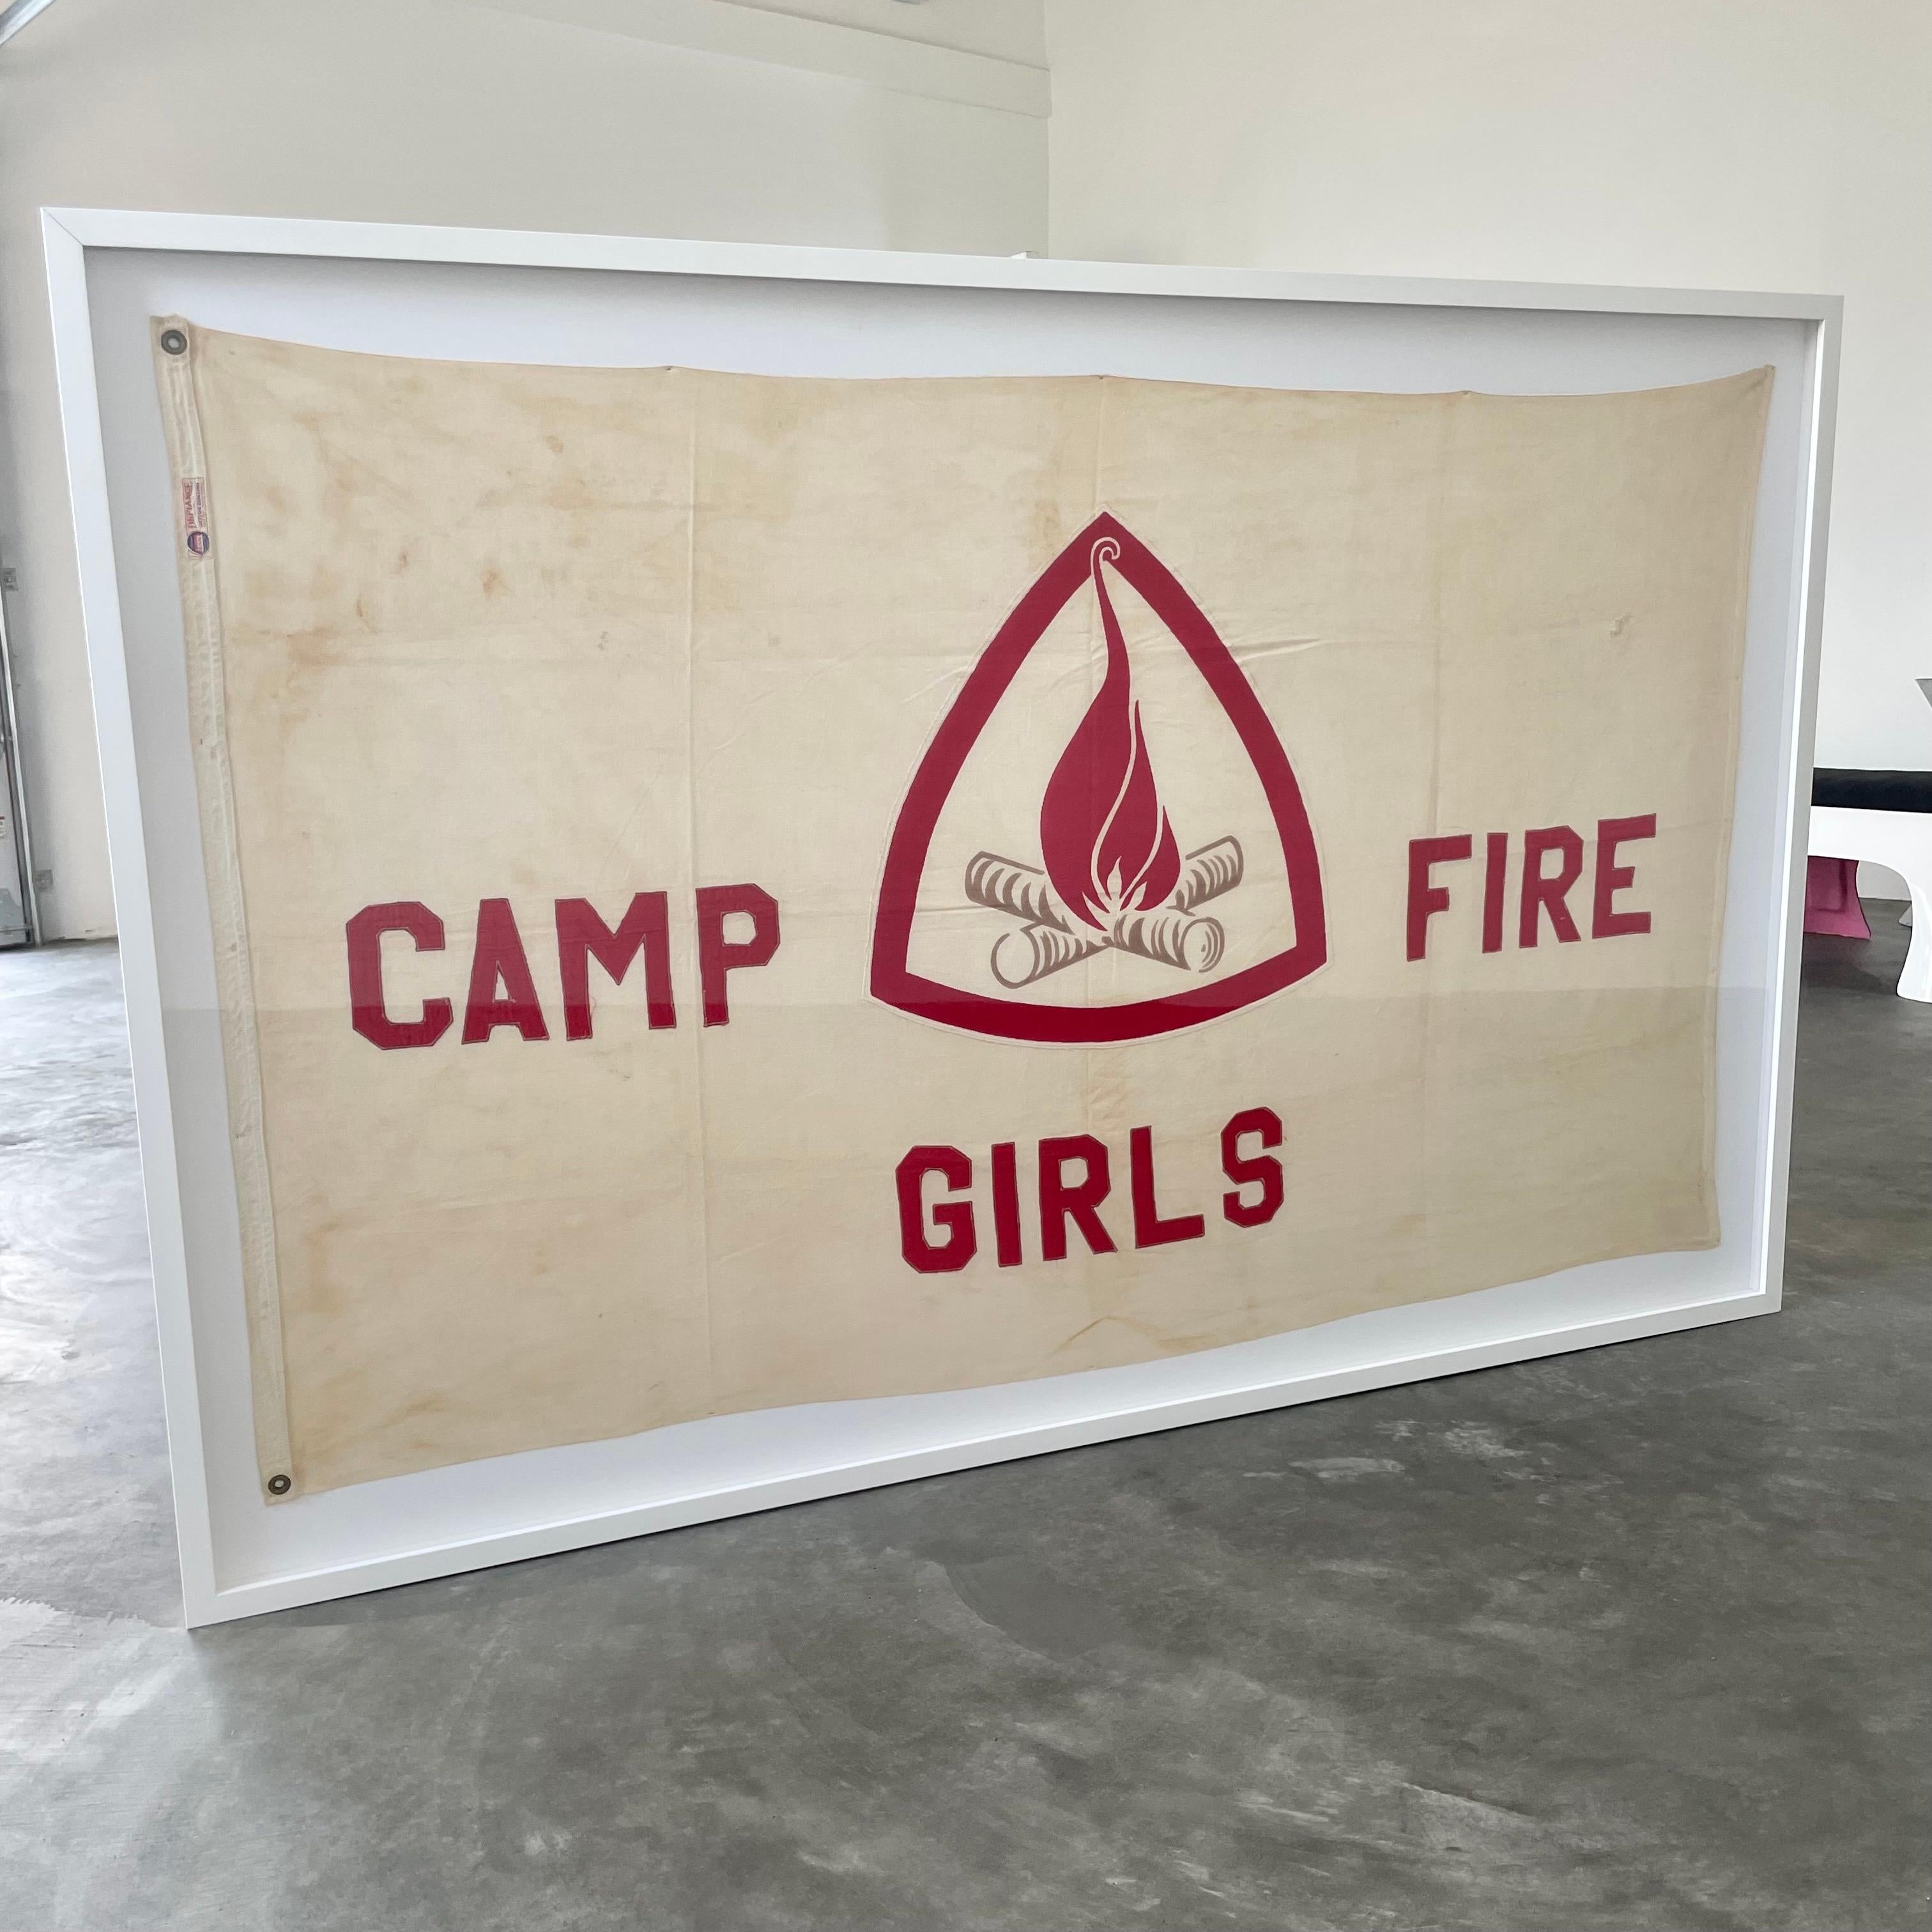 Vintage cotton flag for CAMP FIRE GIRLS, the sister group of the Boy Scouts. Founded in 1910, and ultimately changing names in 1975 to be co-ed. Fun piece of American history. Great coloring and patina to flag. Newly mounted with linen backdrop,